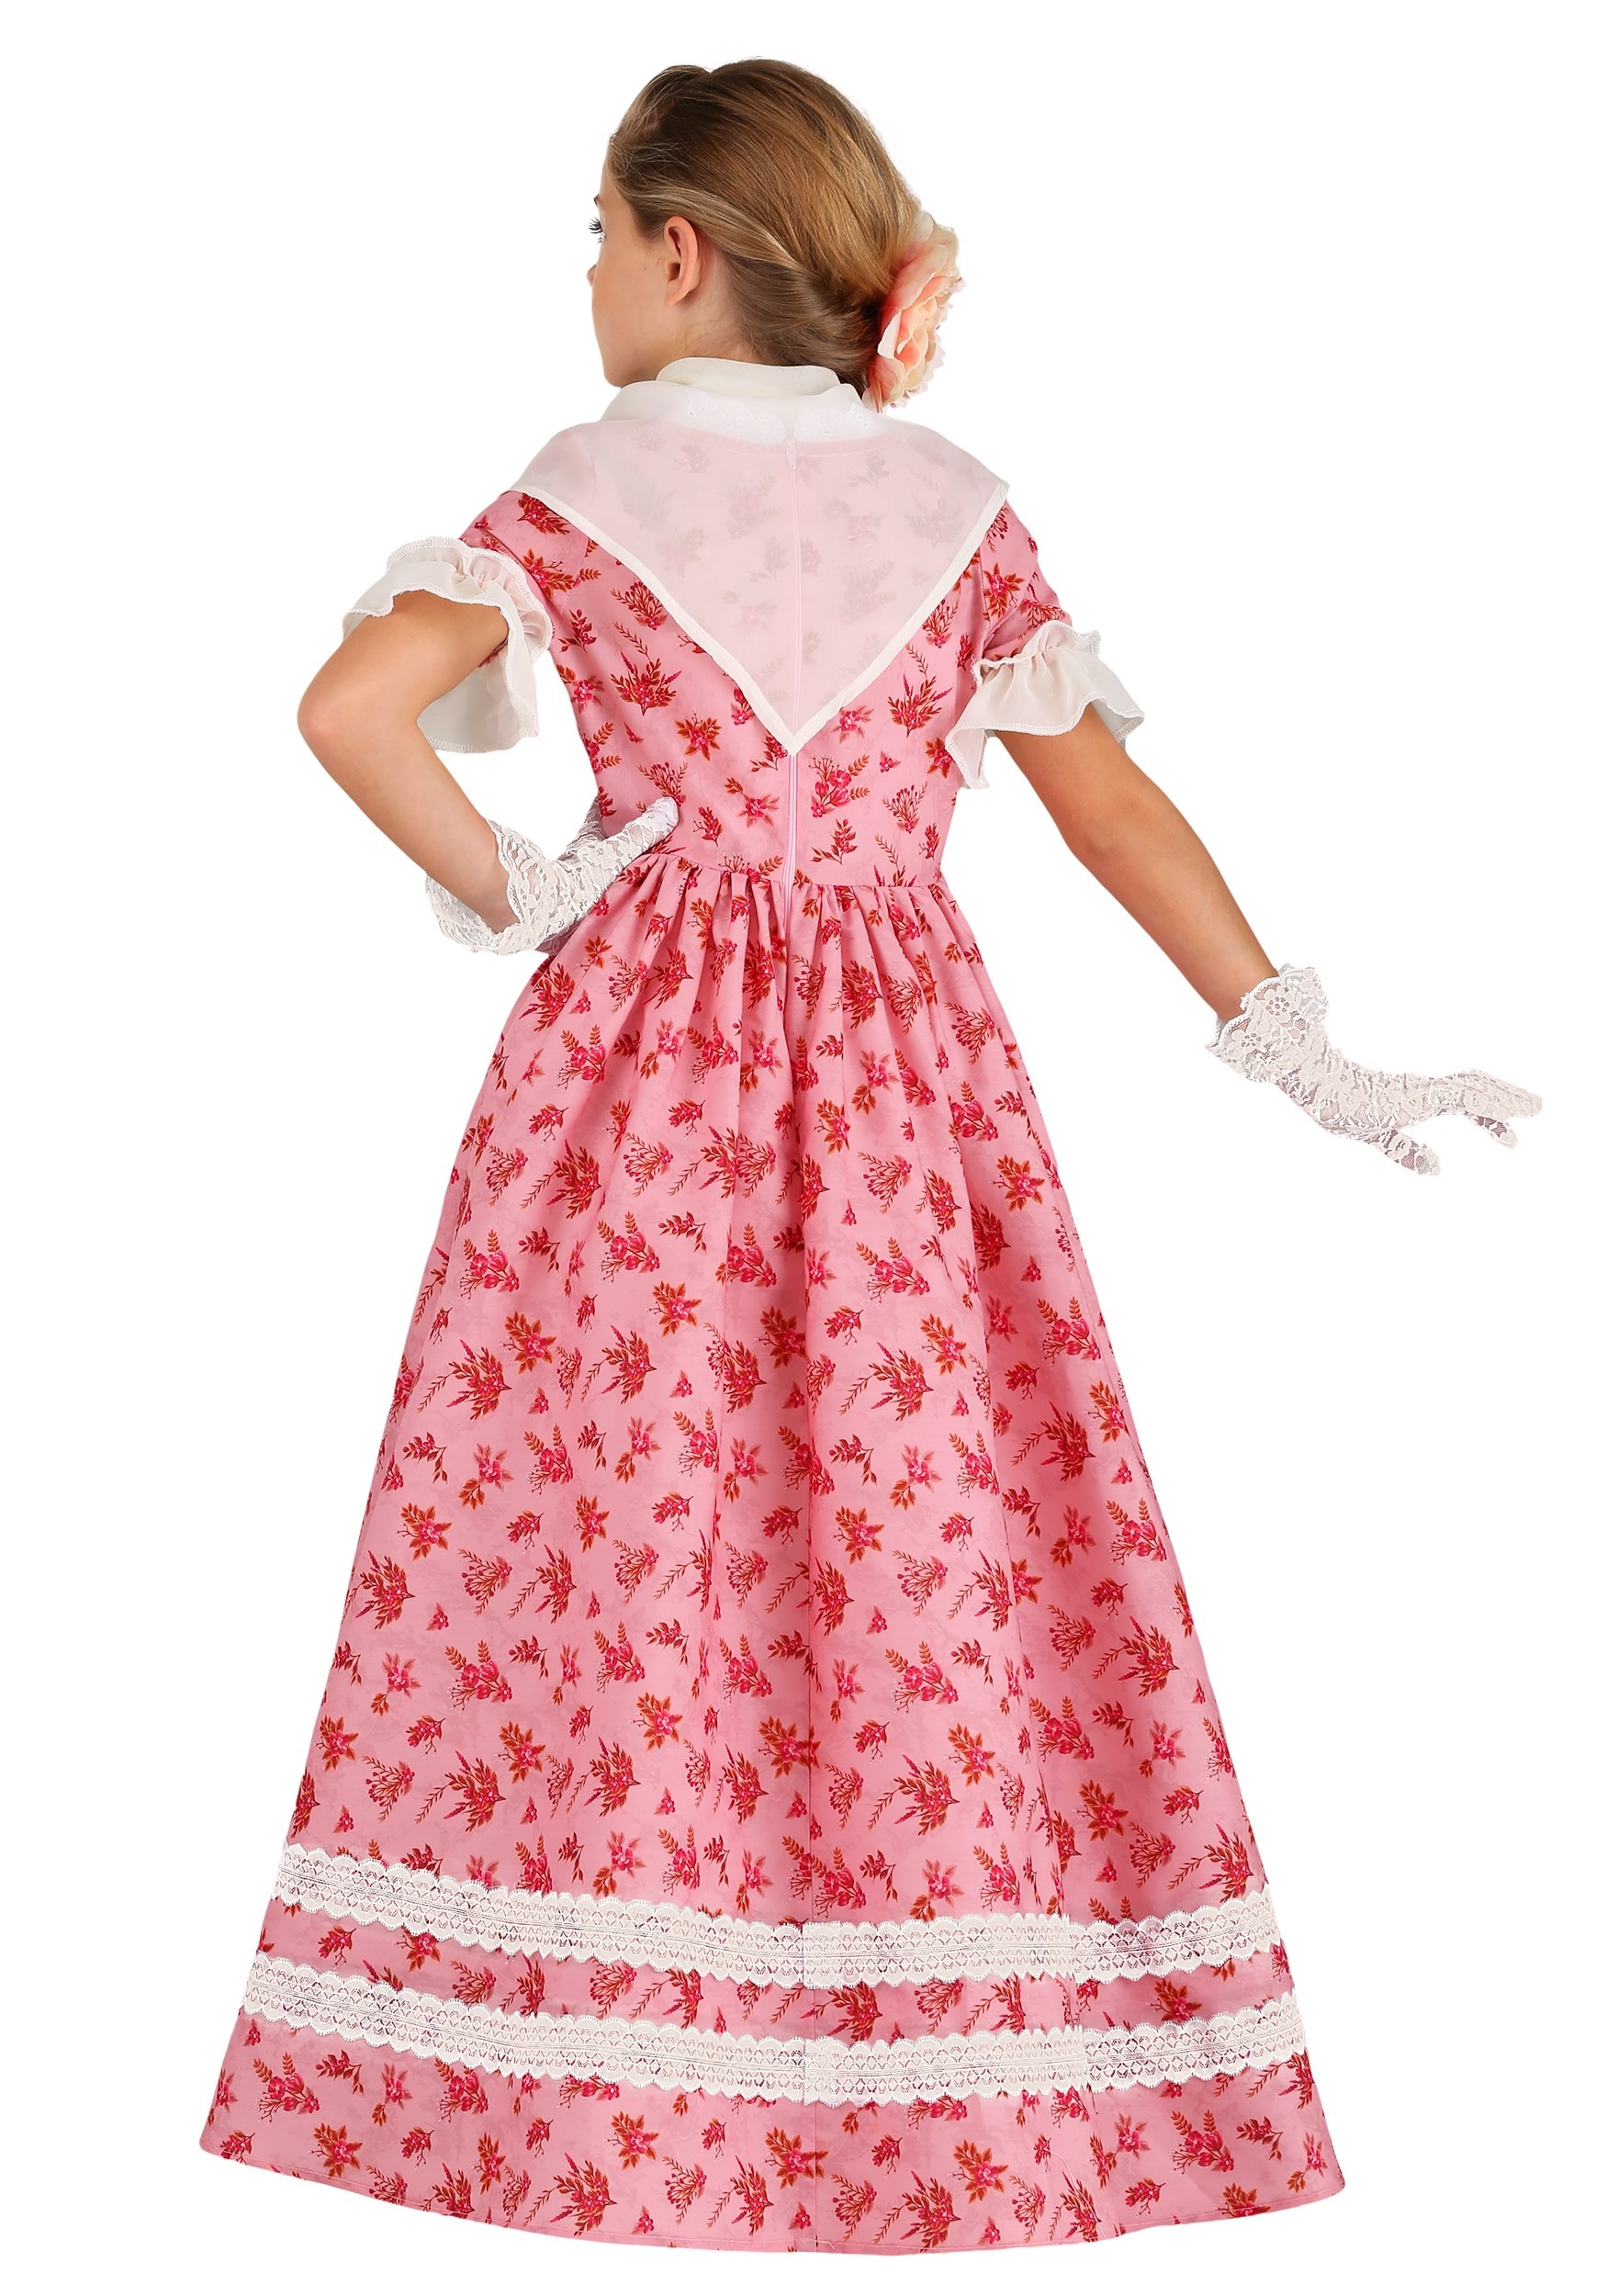 Lovely Southern Belle Kid's Costume